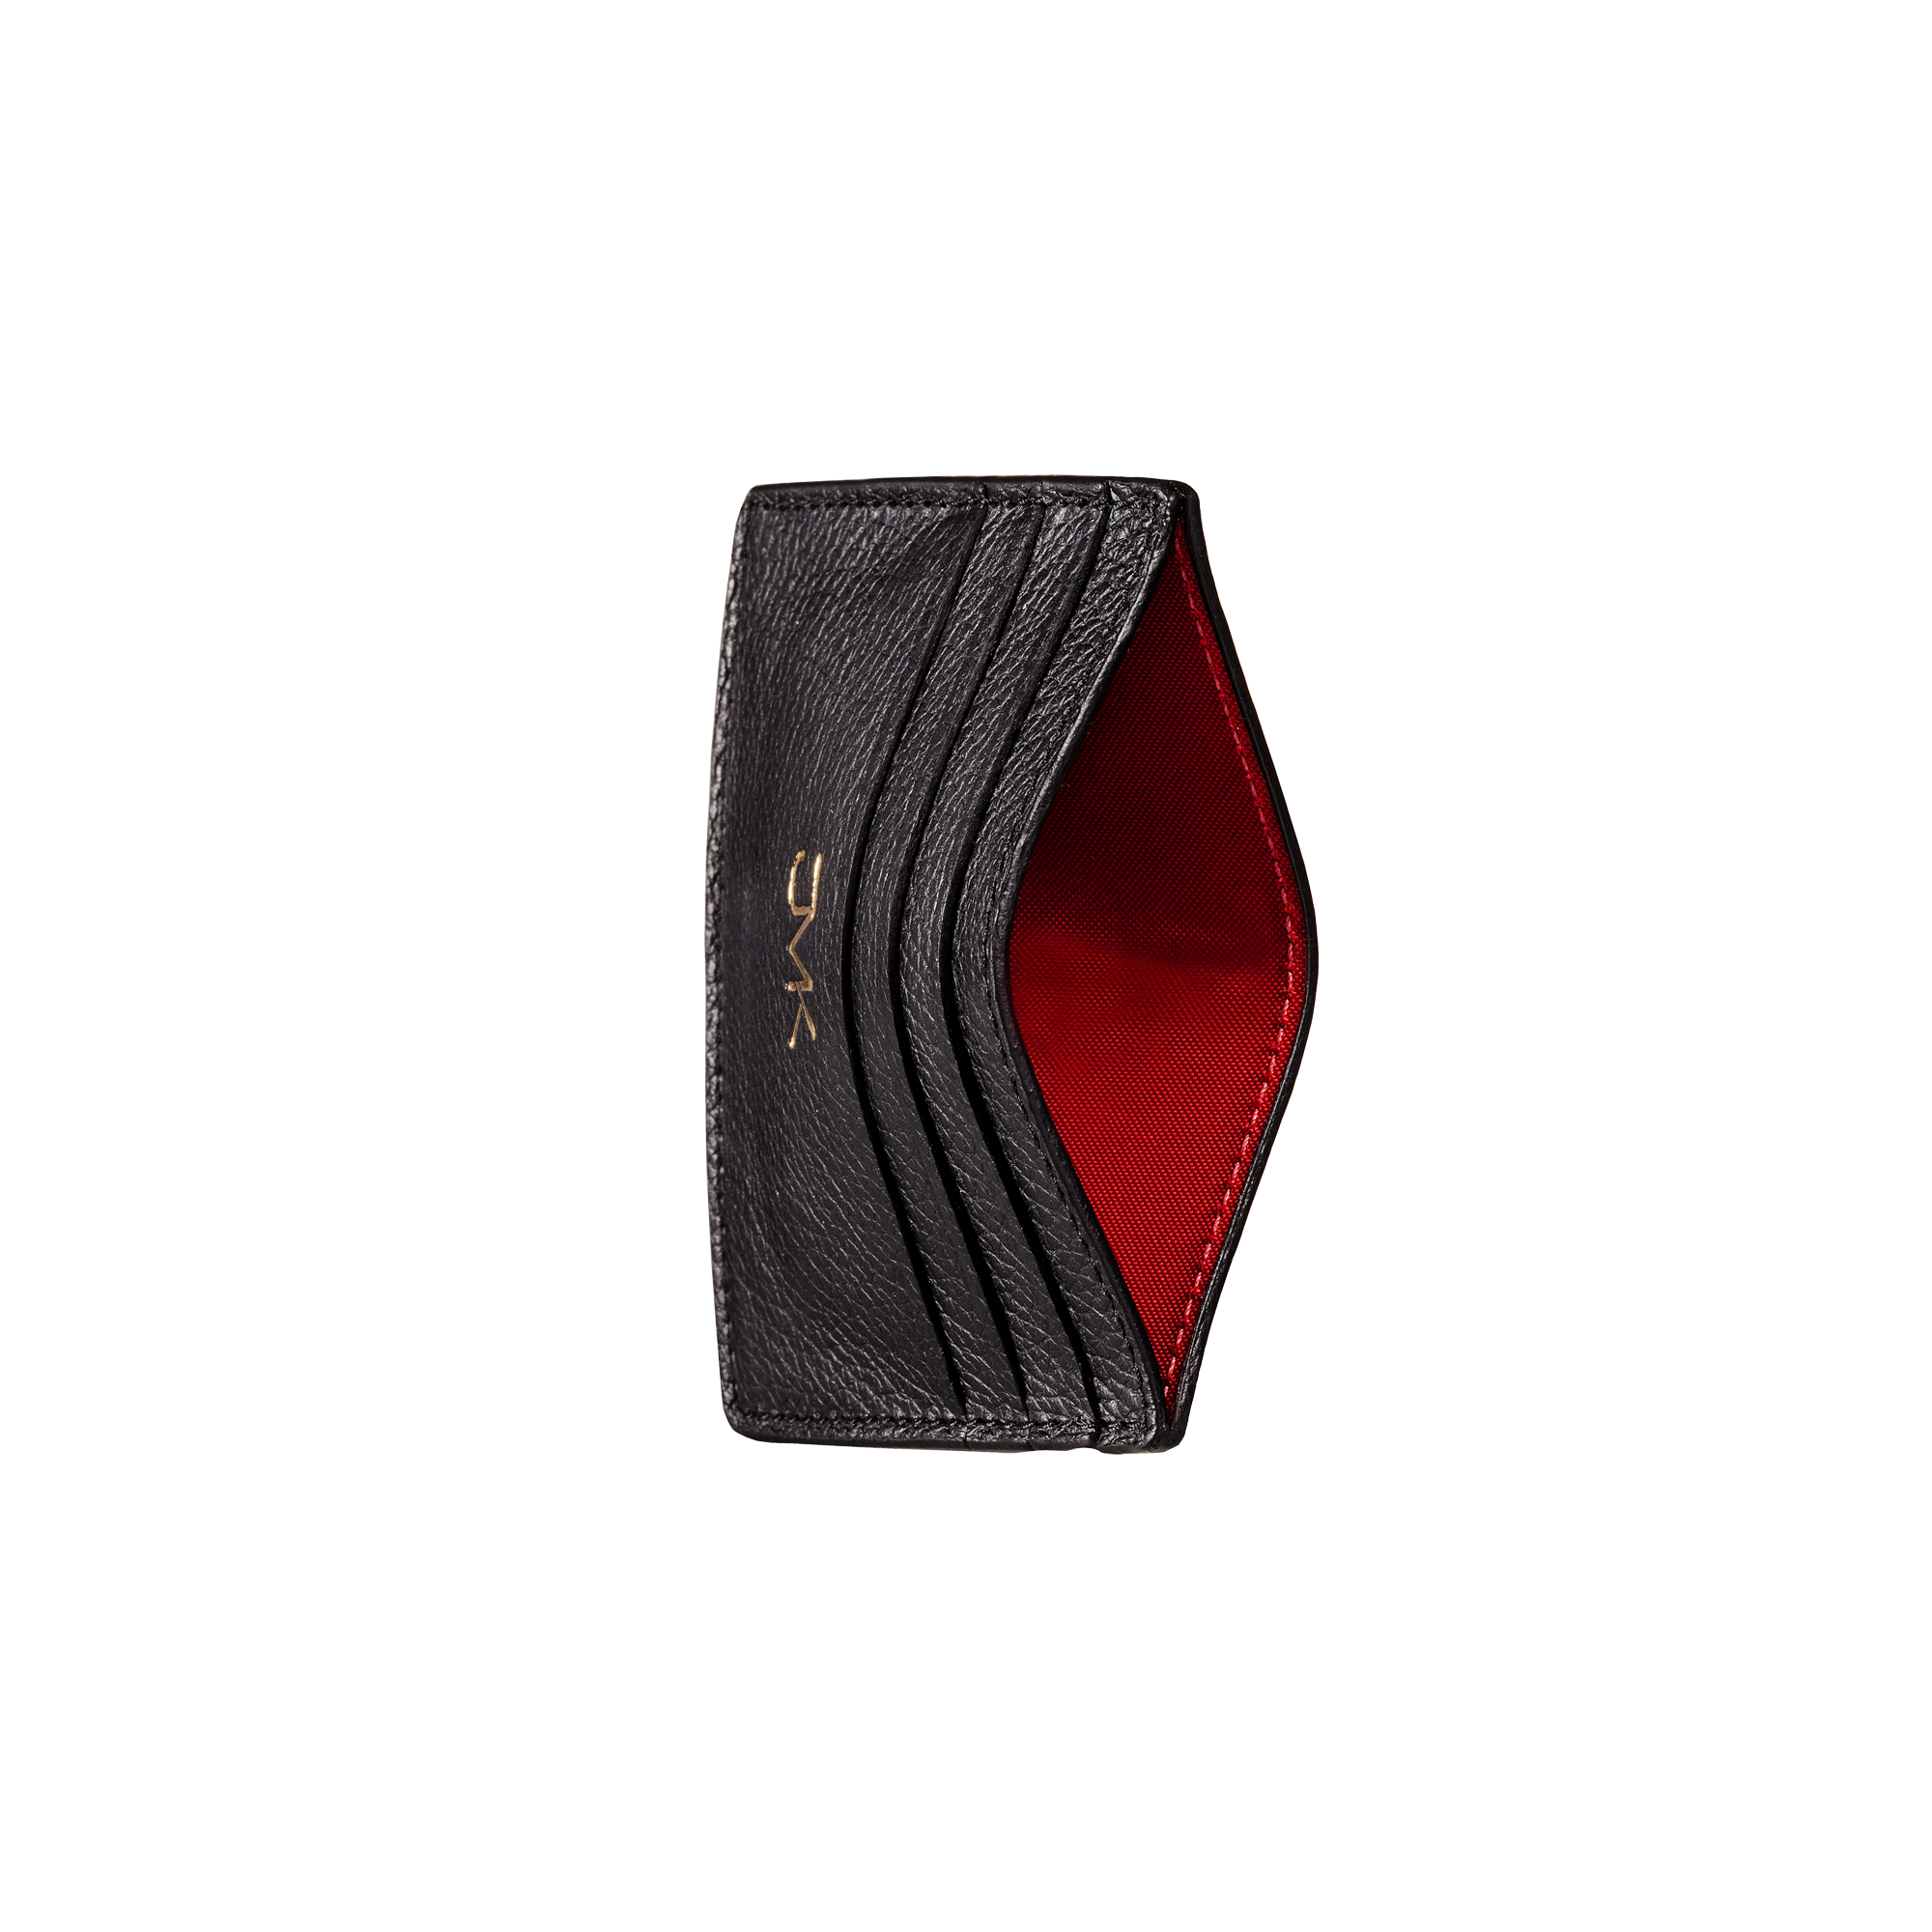 Card Holder - 6 Slots, Grain Leather Black/Red, MAISON JMK-VONMEL Luxe Gifts